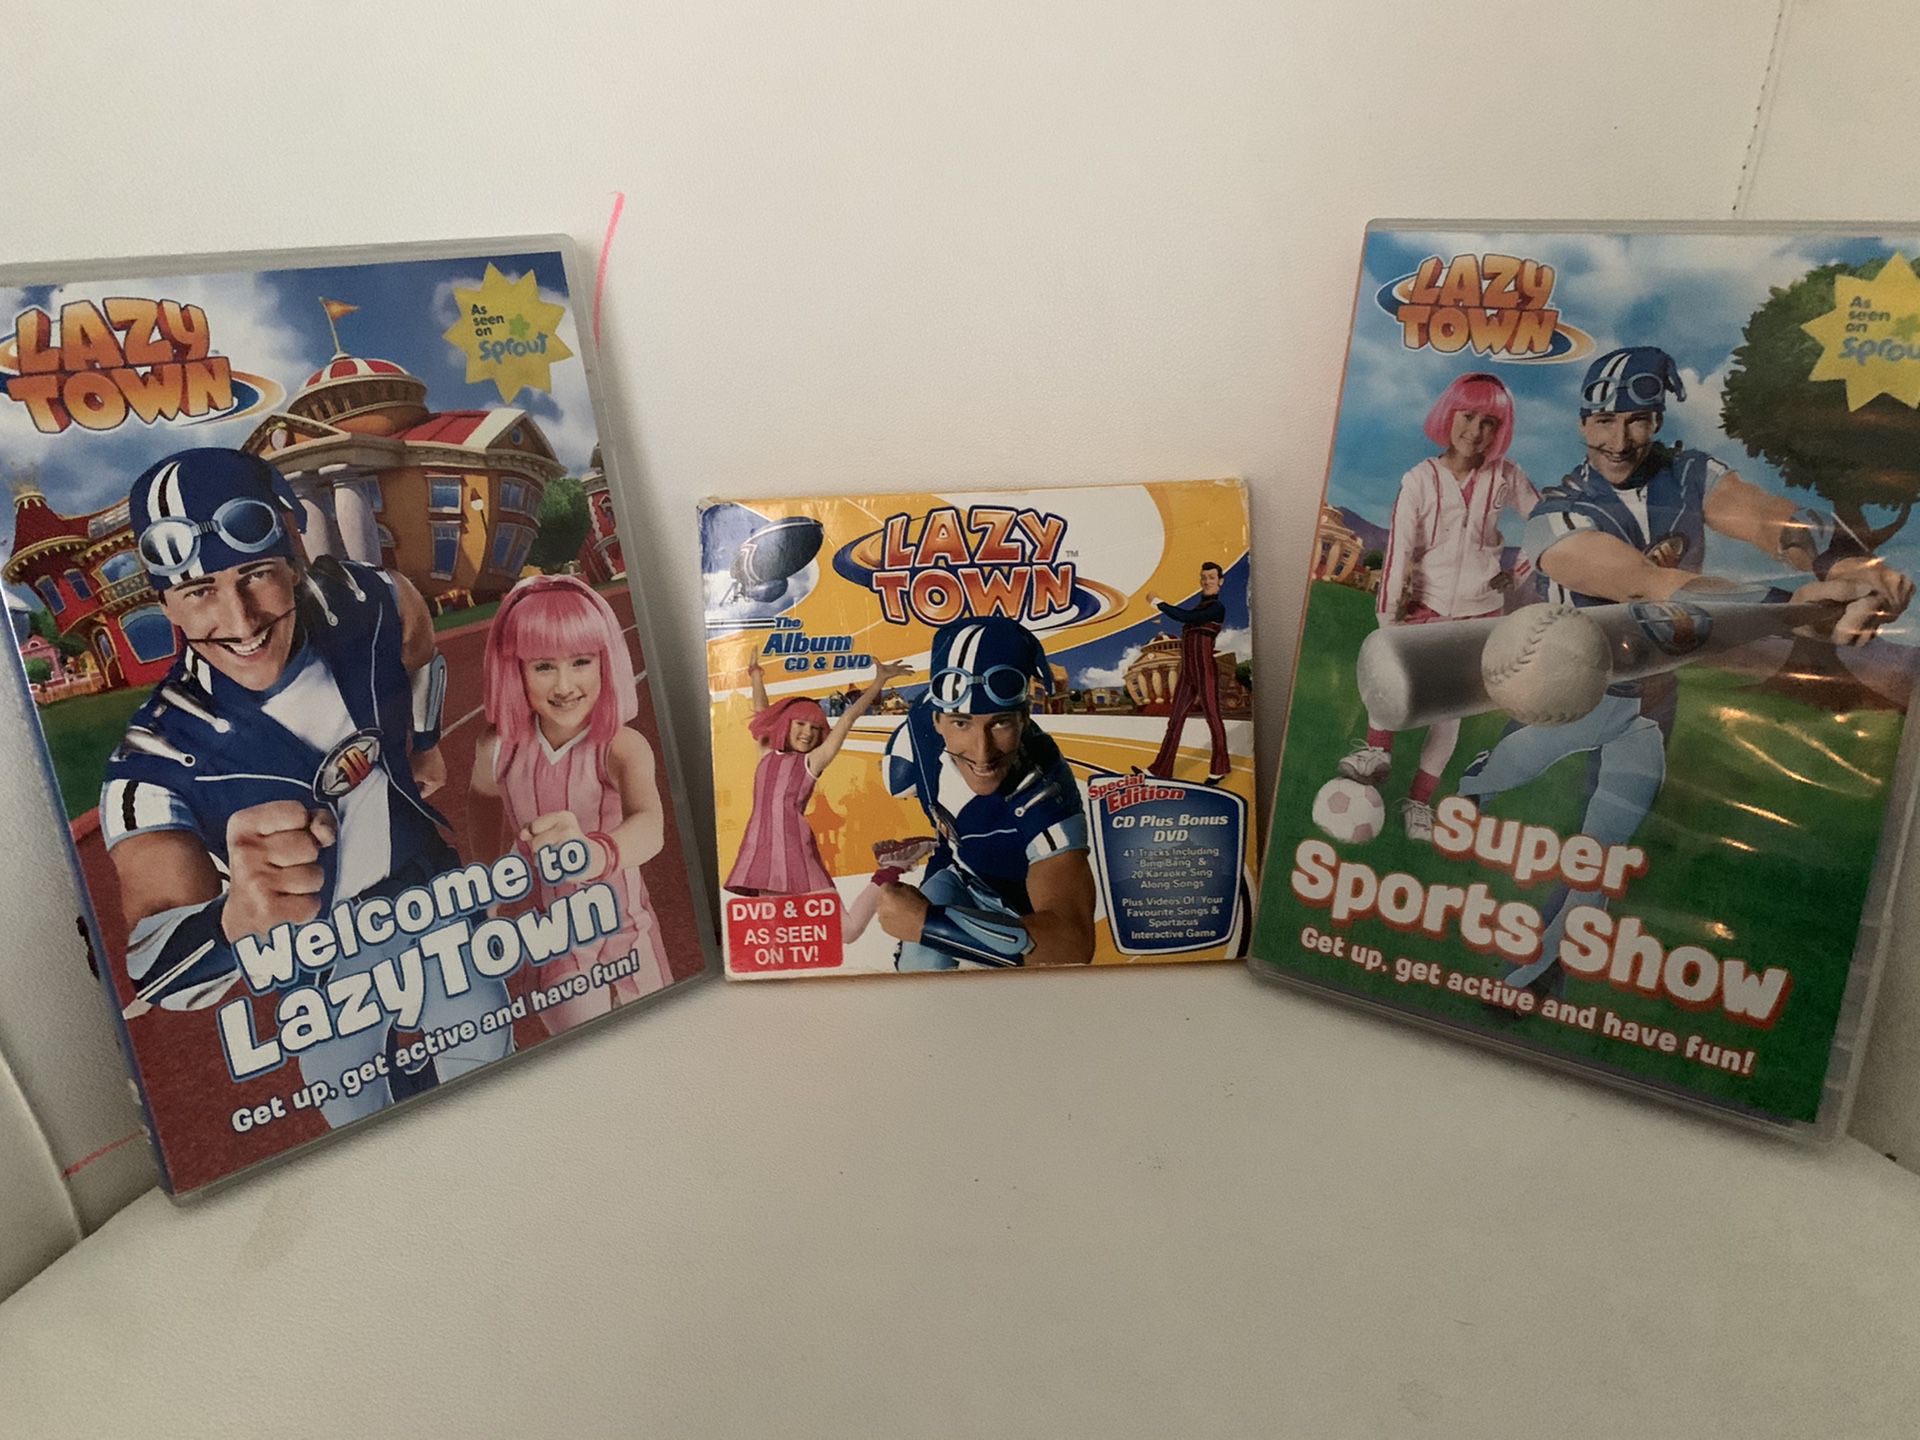 Lazy town DVDs and CDs